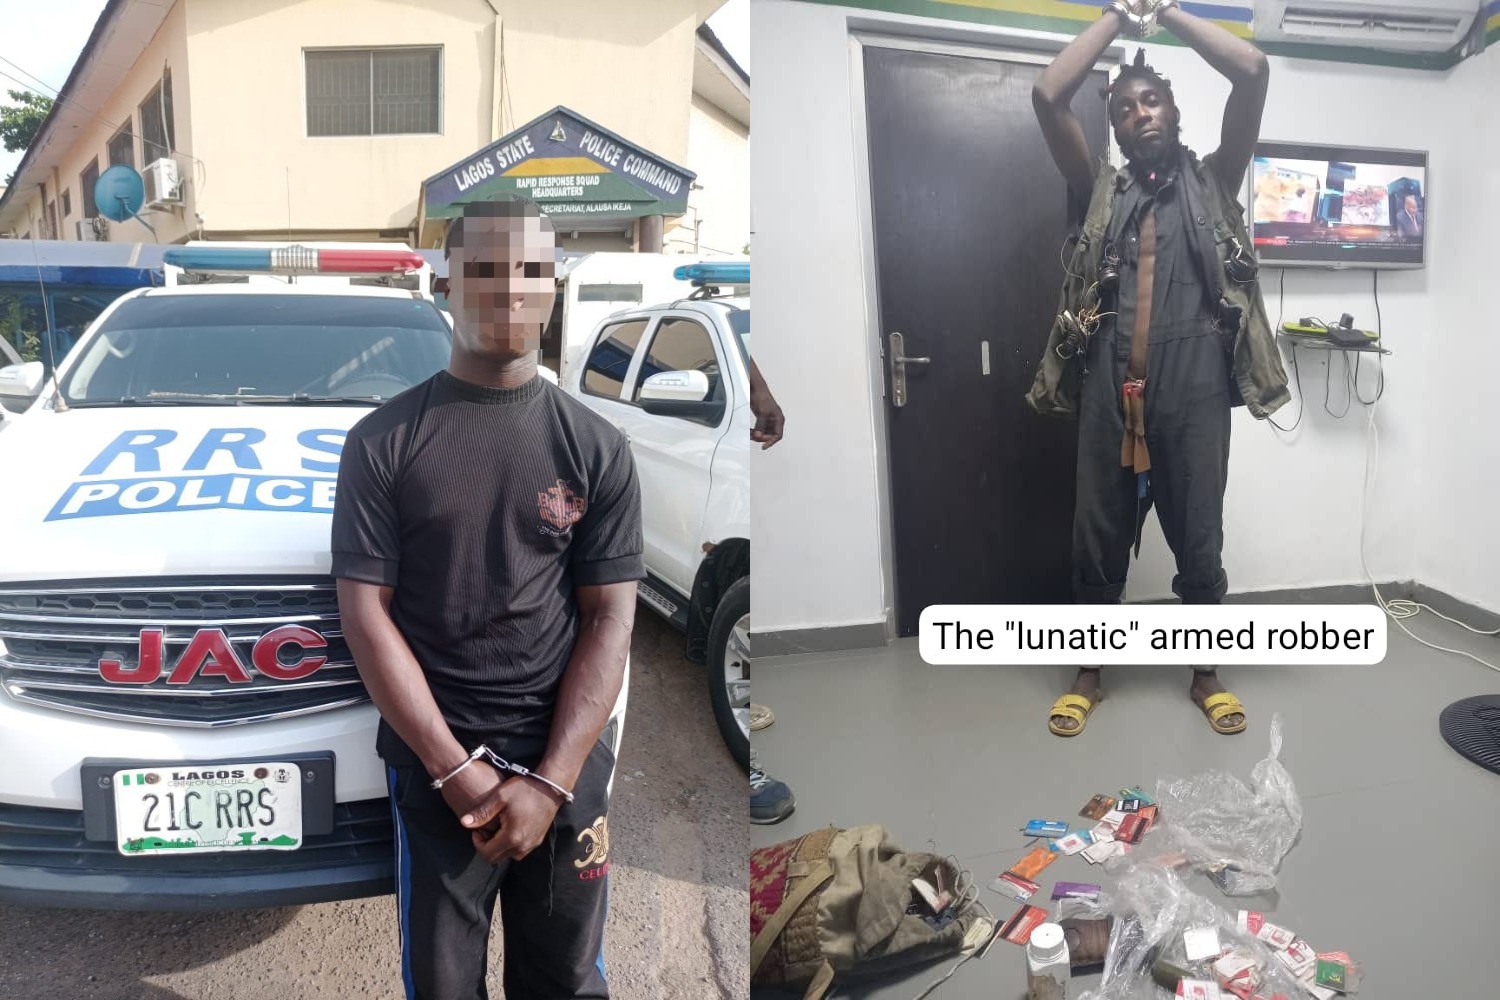 Police arrest armed robber who dresses like a lunatic to kidnap and rob victims